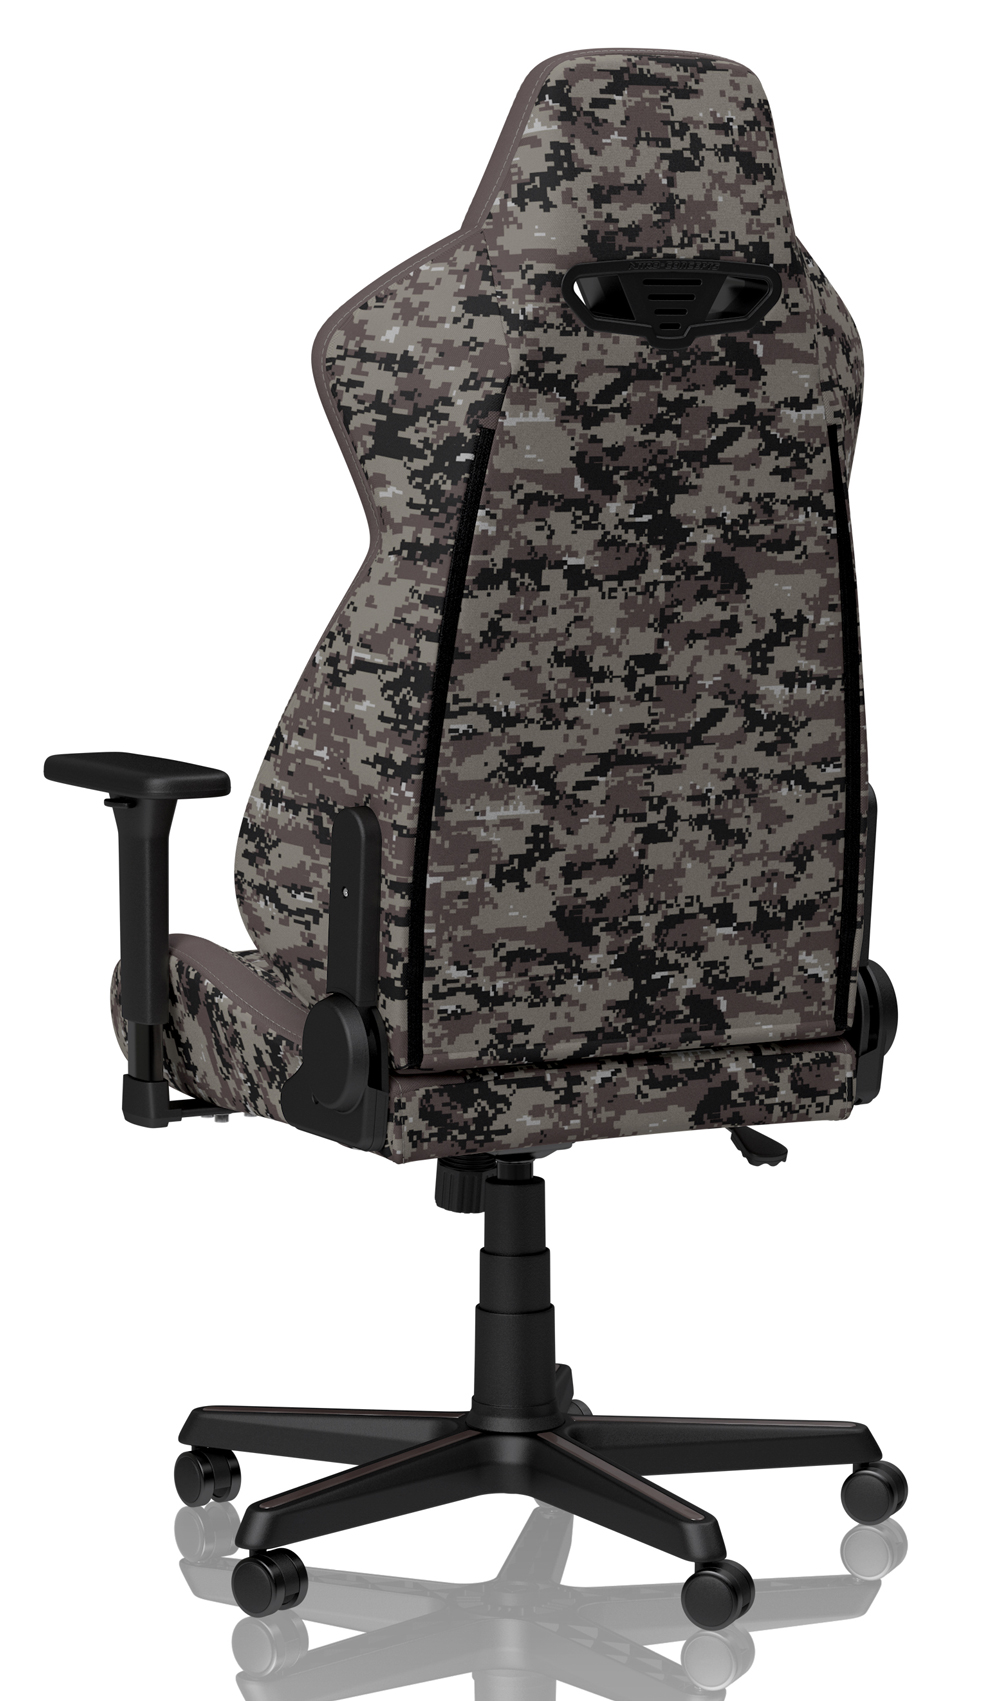 Nitro Concepts S300 Fabric Gaming Chair Urban Camo Best Deal South Africa